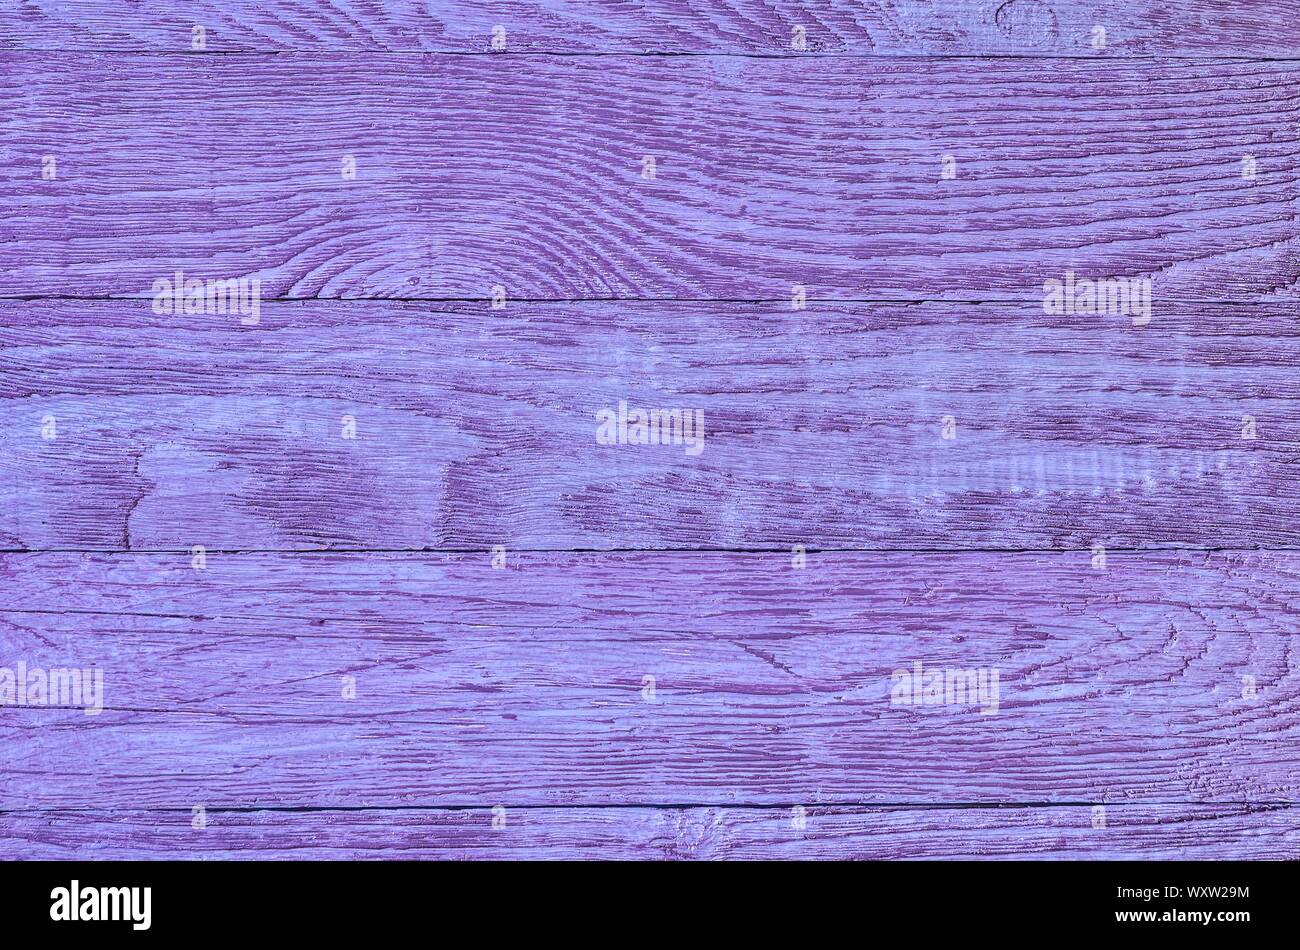 Wooden background texture. Creatively painted intense violet boards. Stock Photo